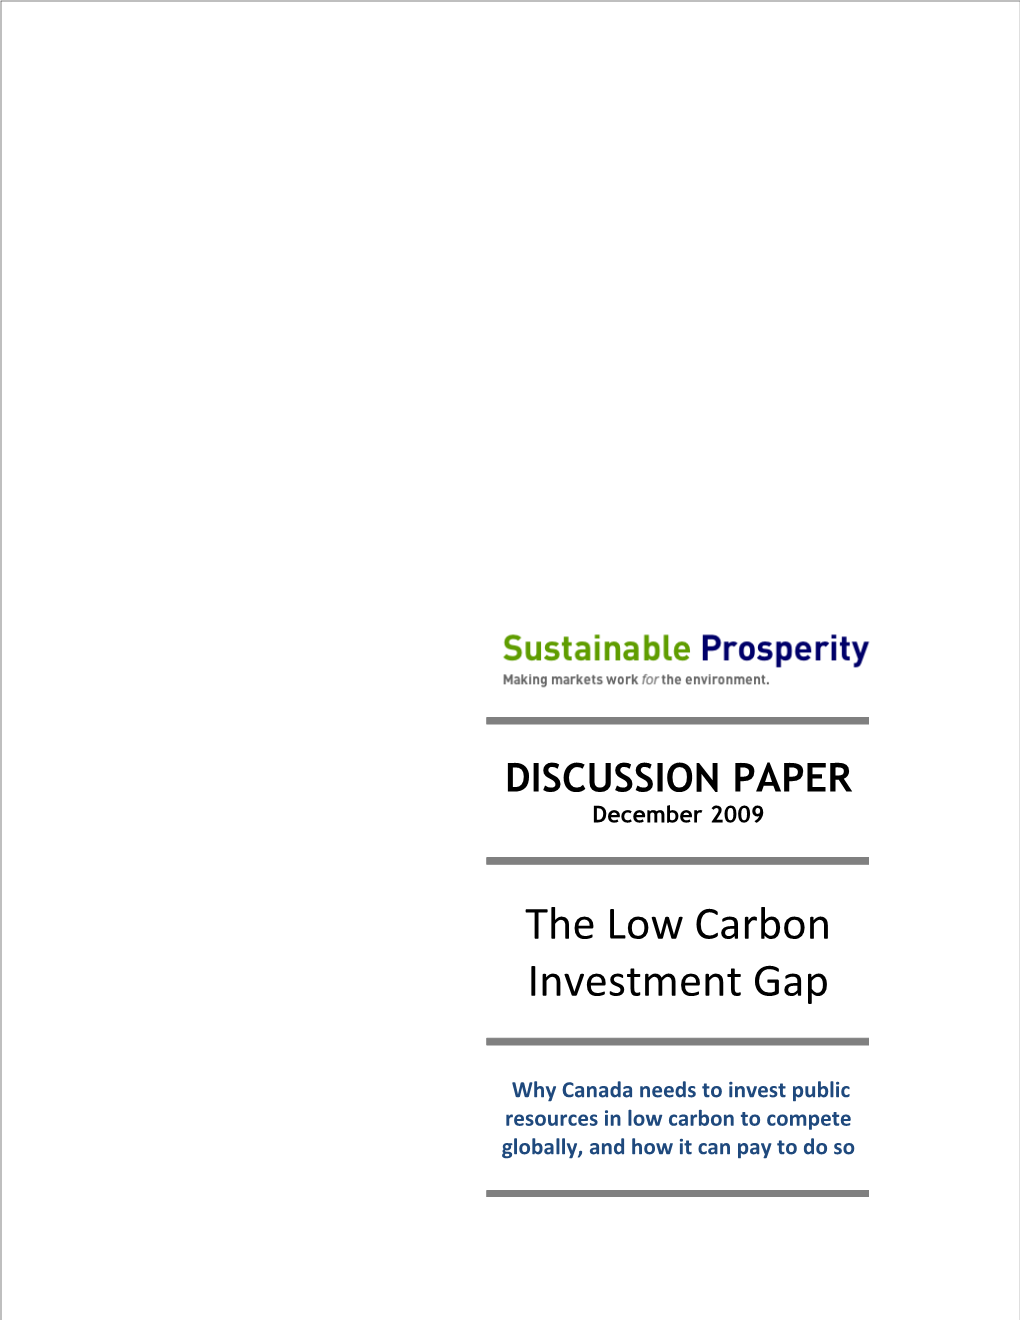 The Low Carbon Investment Gap